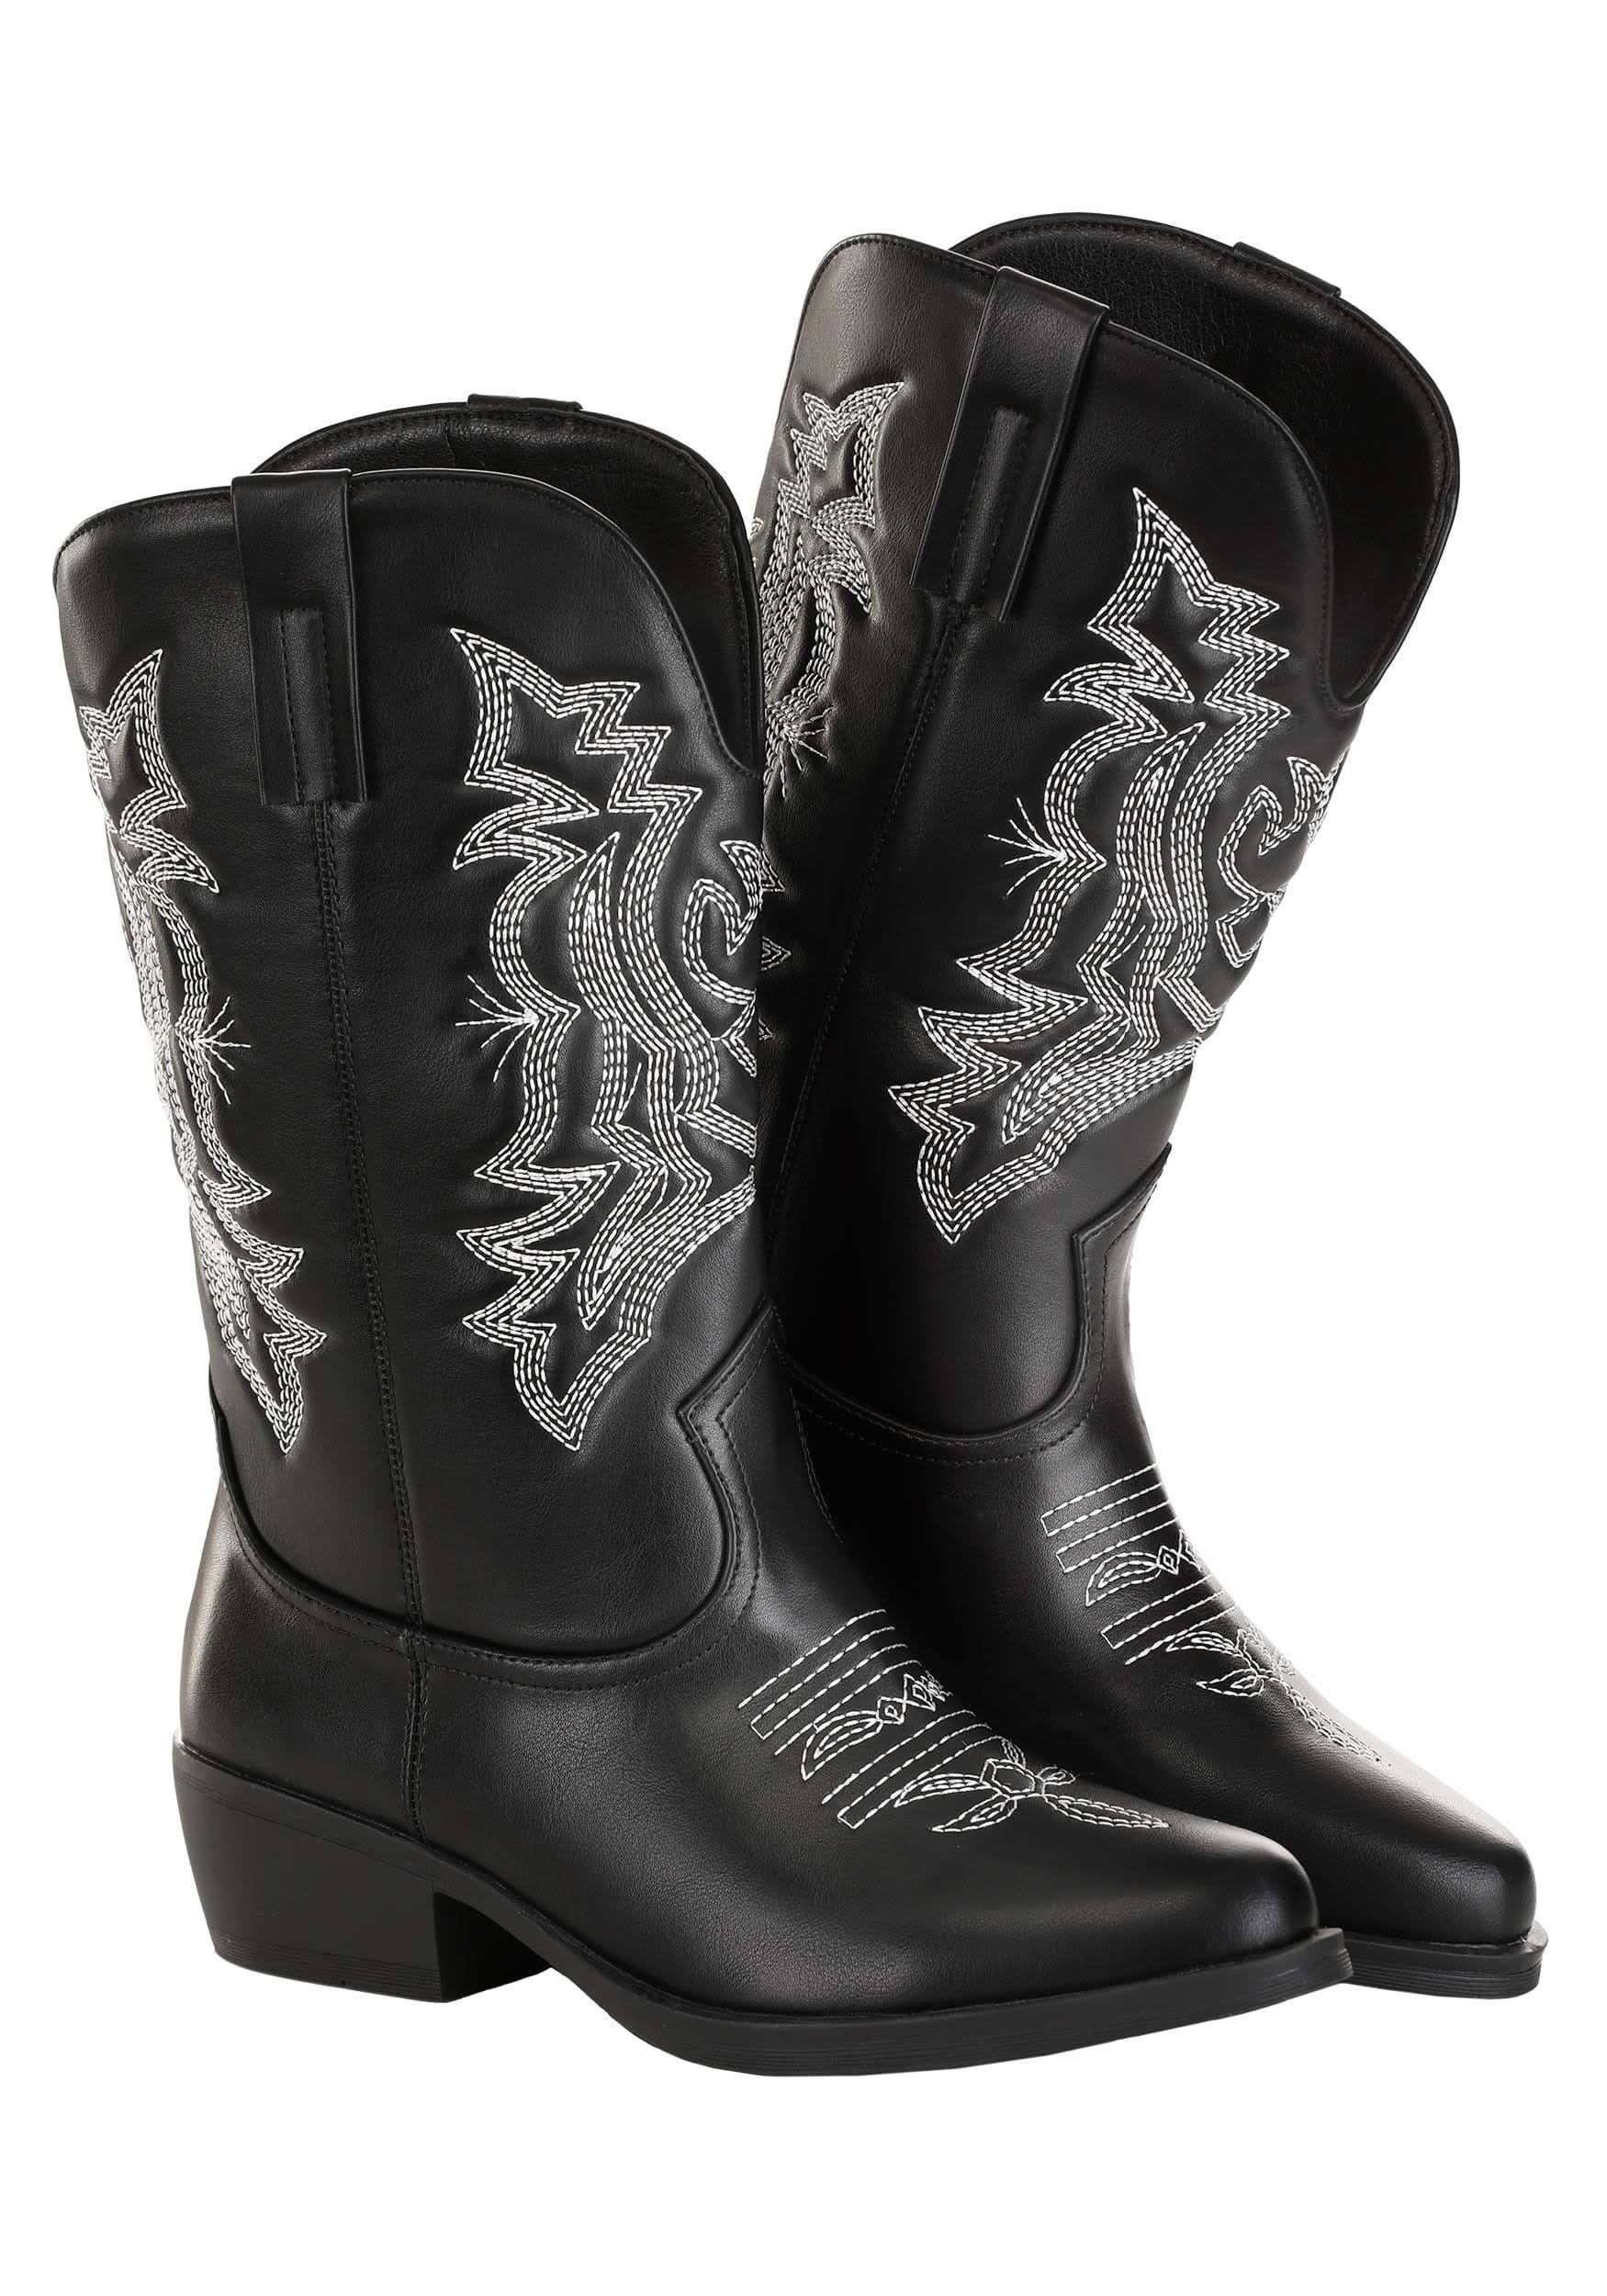 Stylish Black Leather Cowgirl Boots - Perfect for Country Vibes | Image